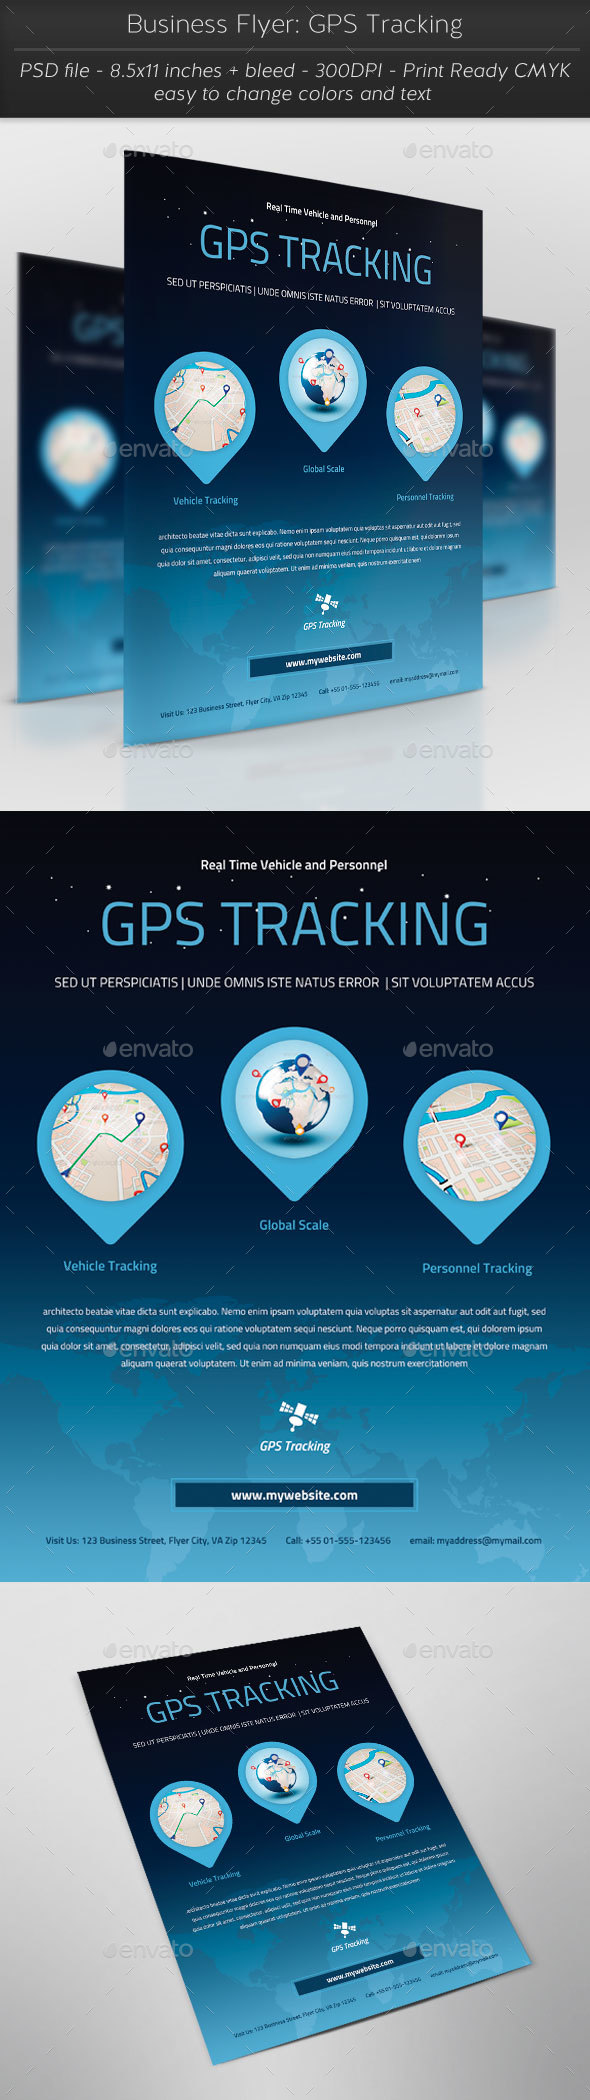 Business Flyer: GPS Tracking